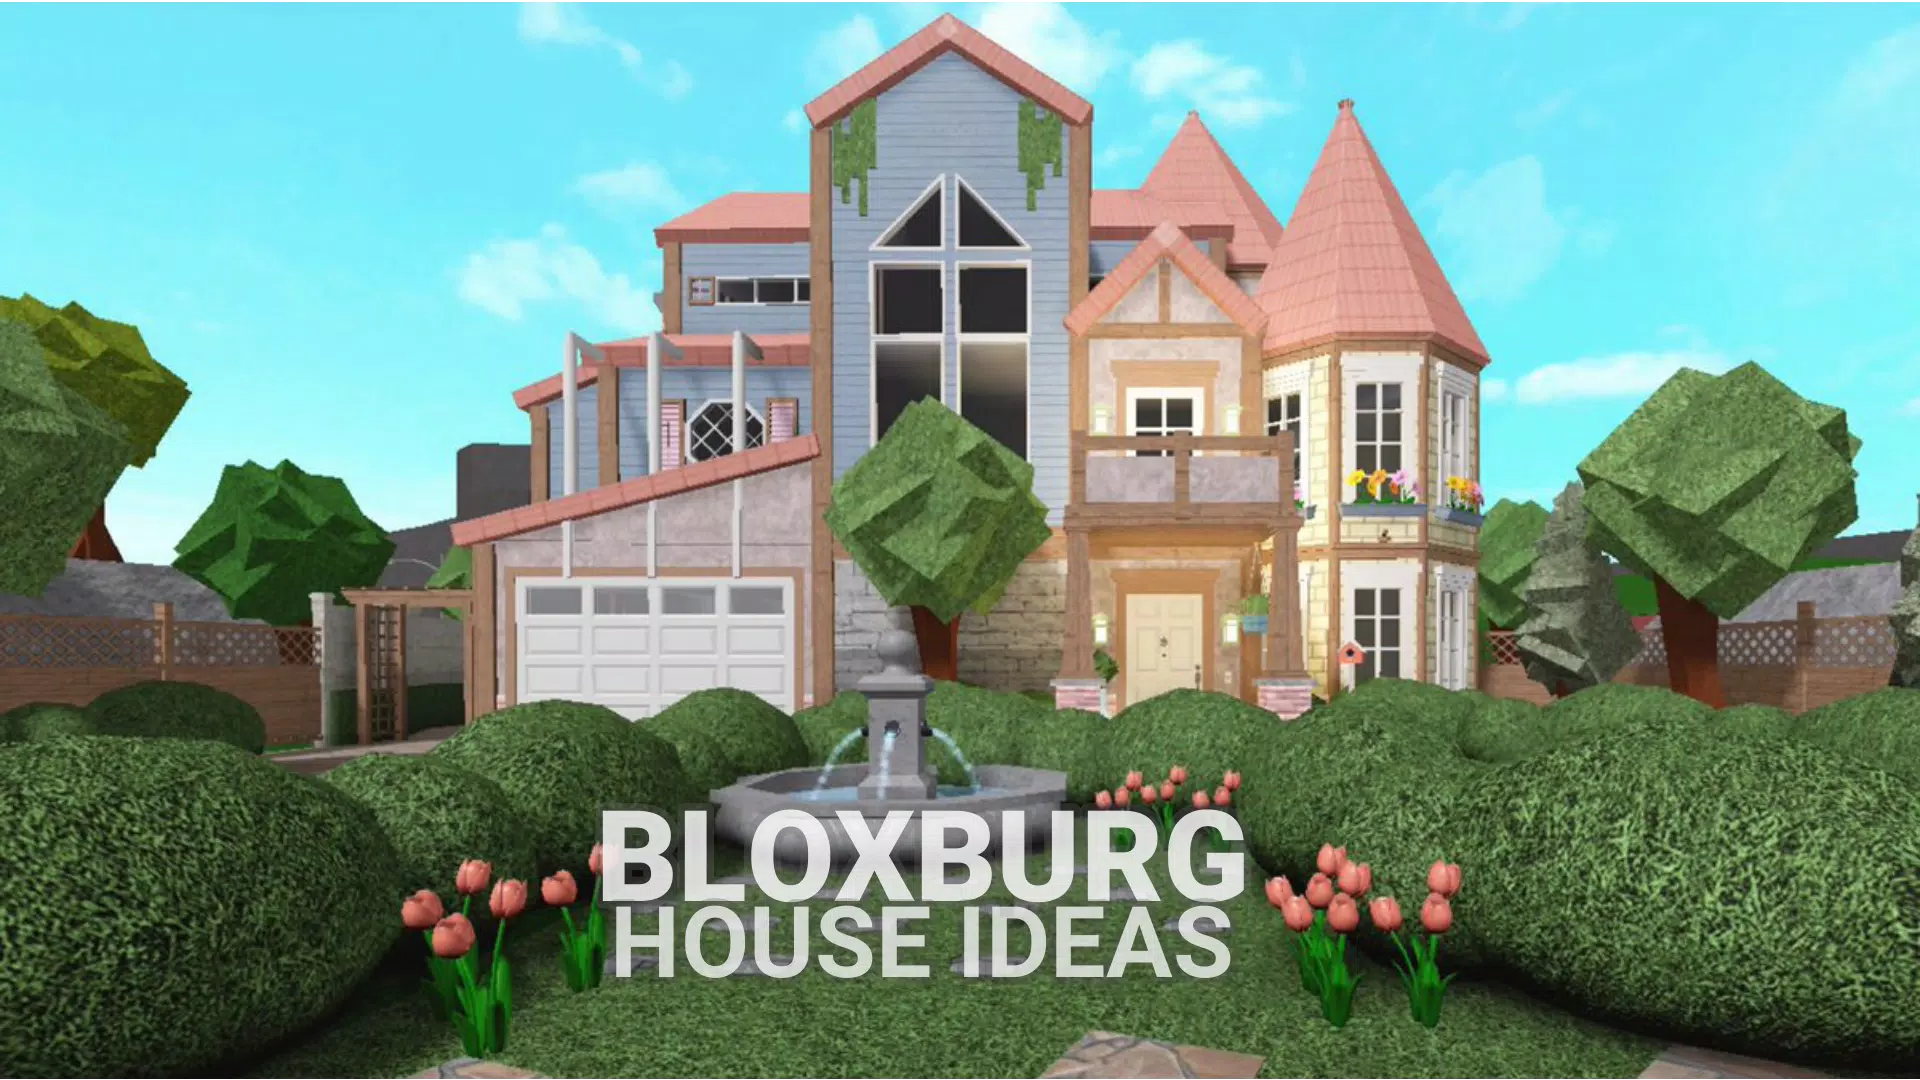 The home that is going to be in roblox bloxburg ideias de design e